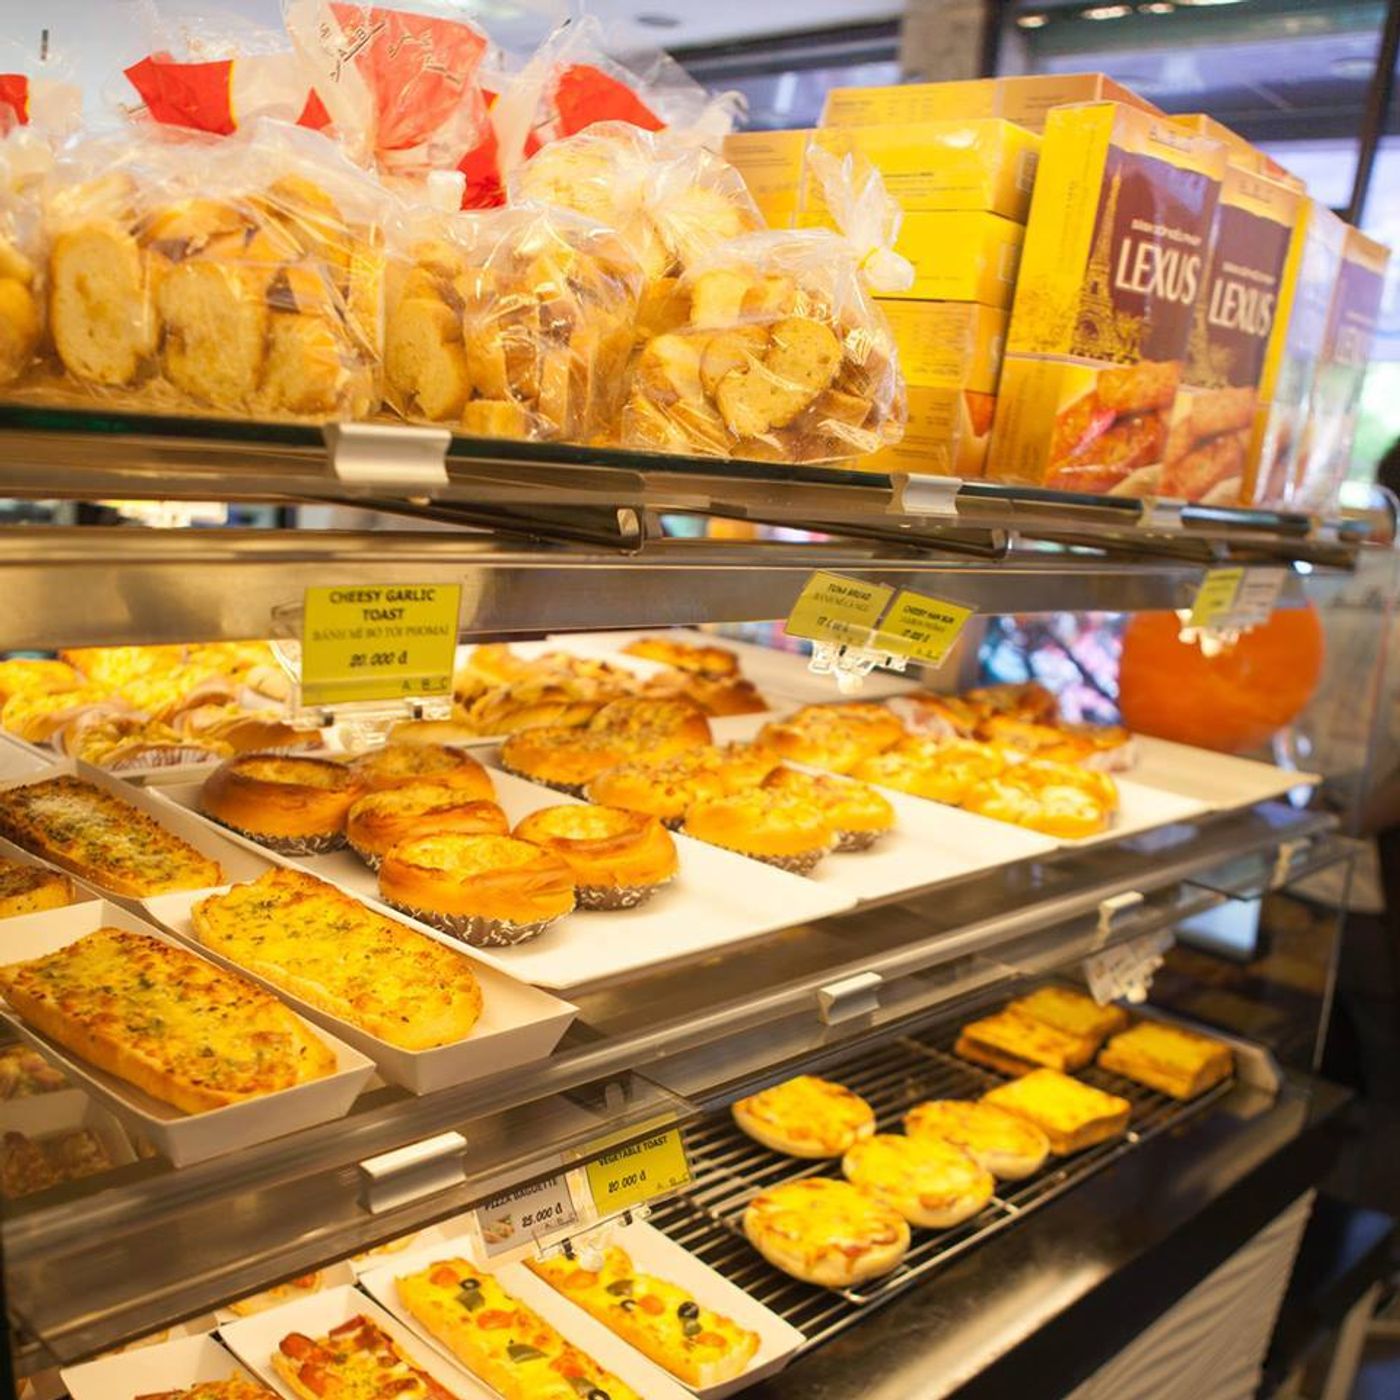 The best bakeries you should try in Ho Chi Minh City